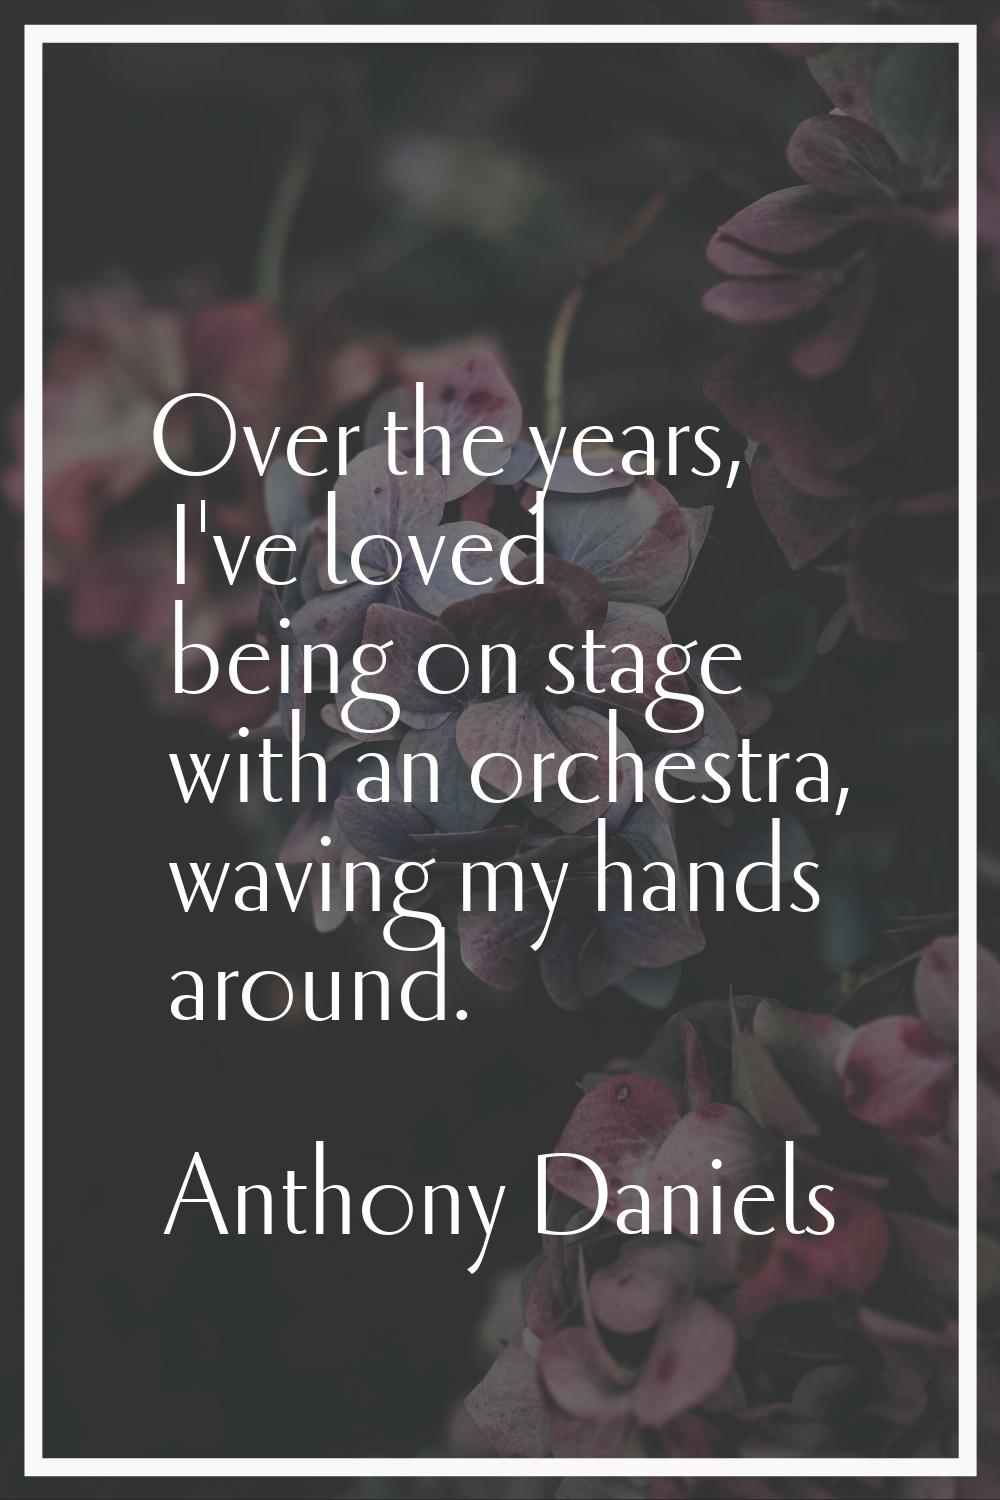 Over the years, I've loved being on stage with an orchestra, waving my hands around.